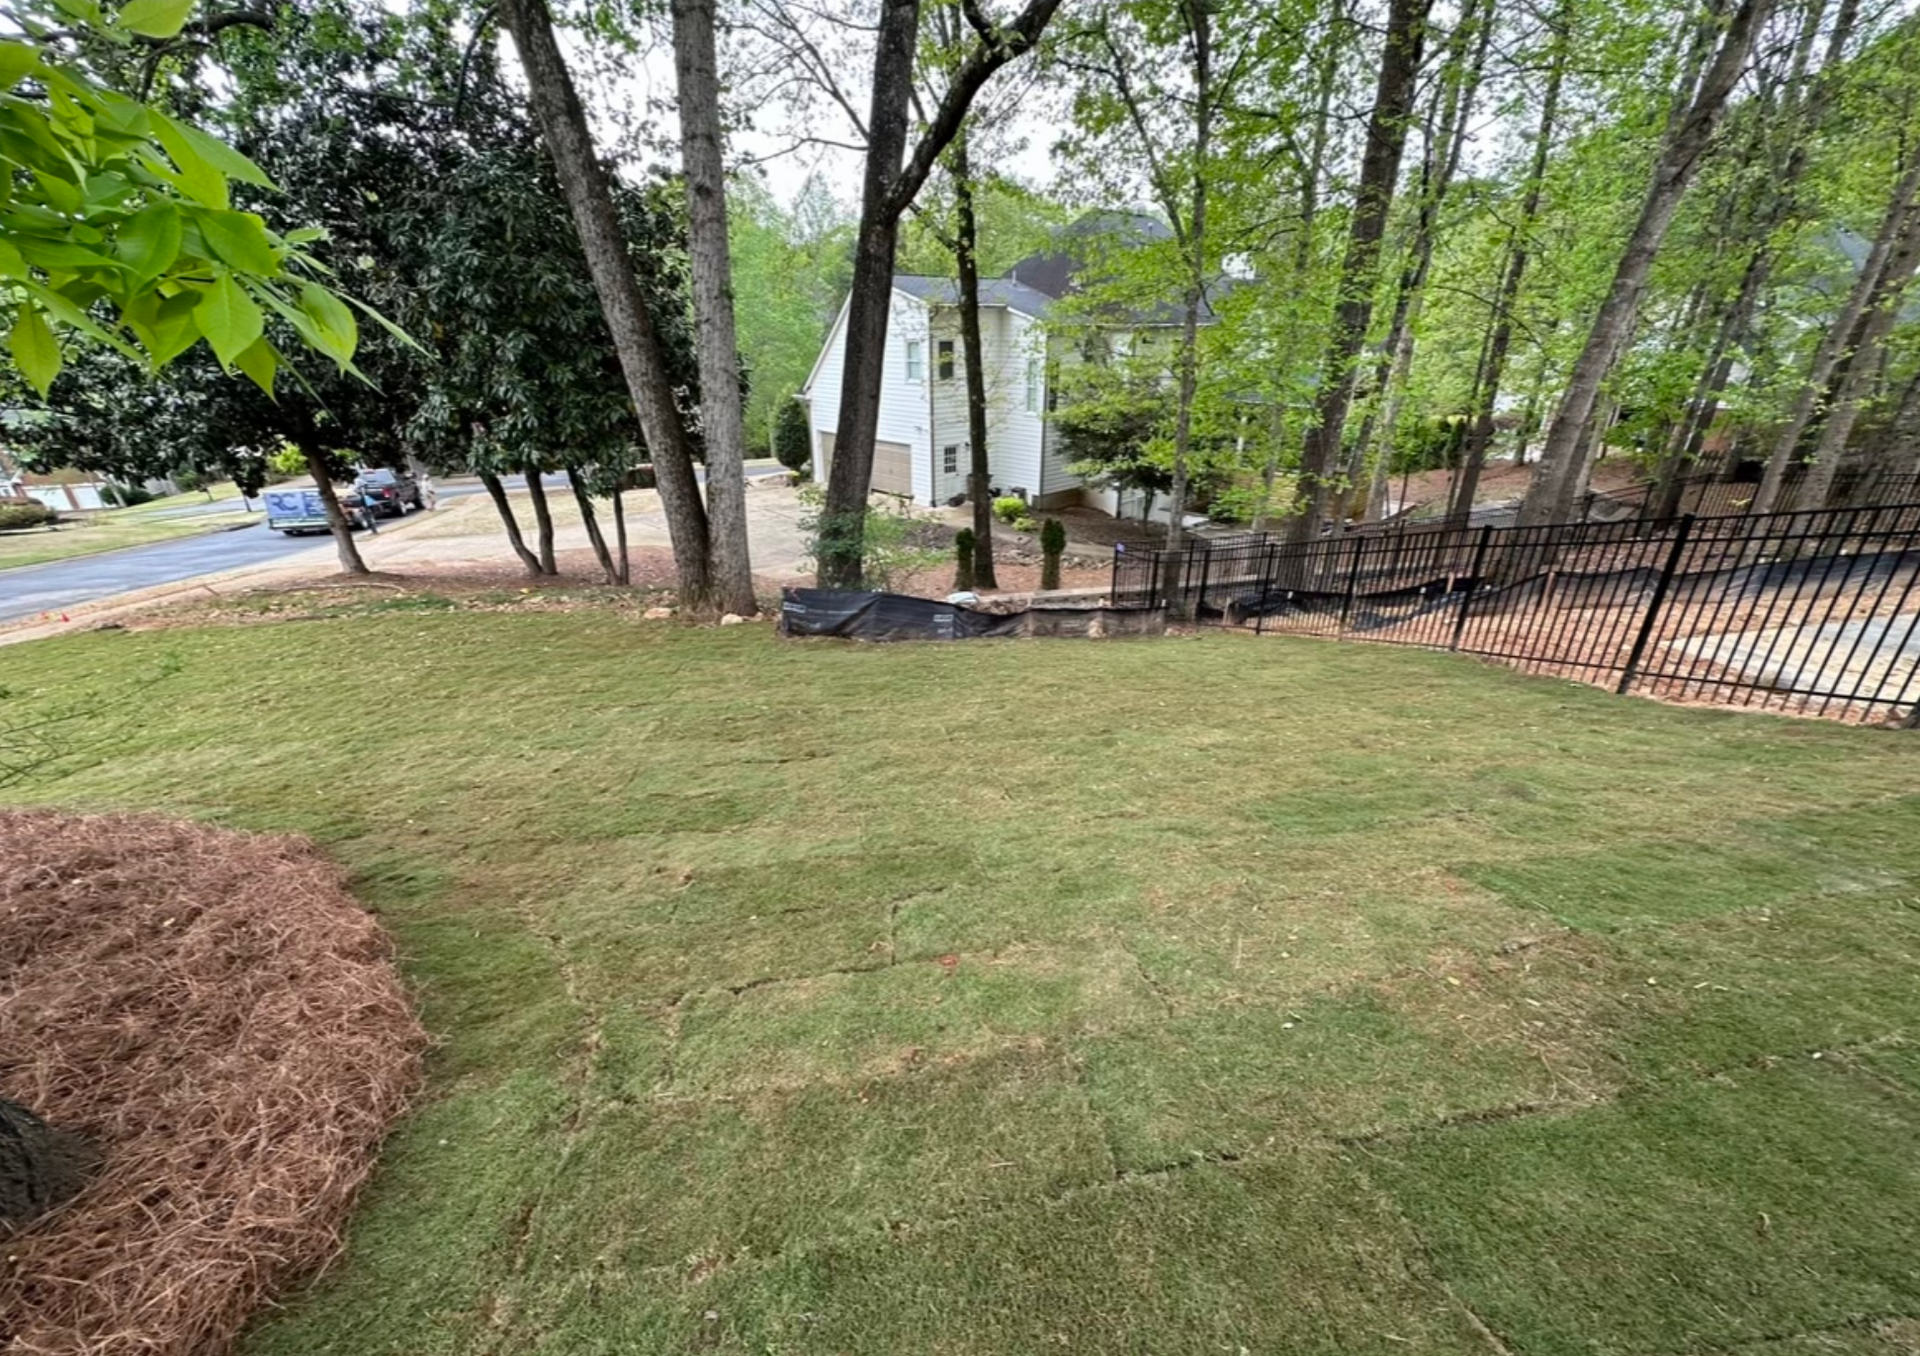 New sod installation by RC Landscapes enhancing a home's outdoor area.